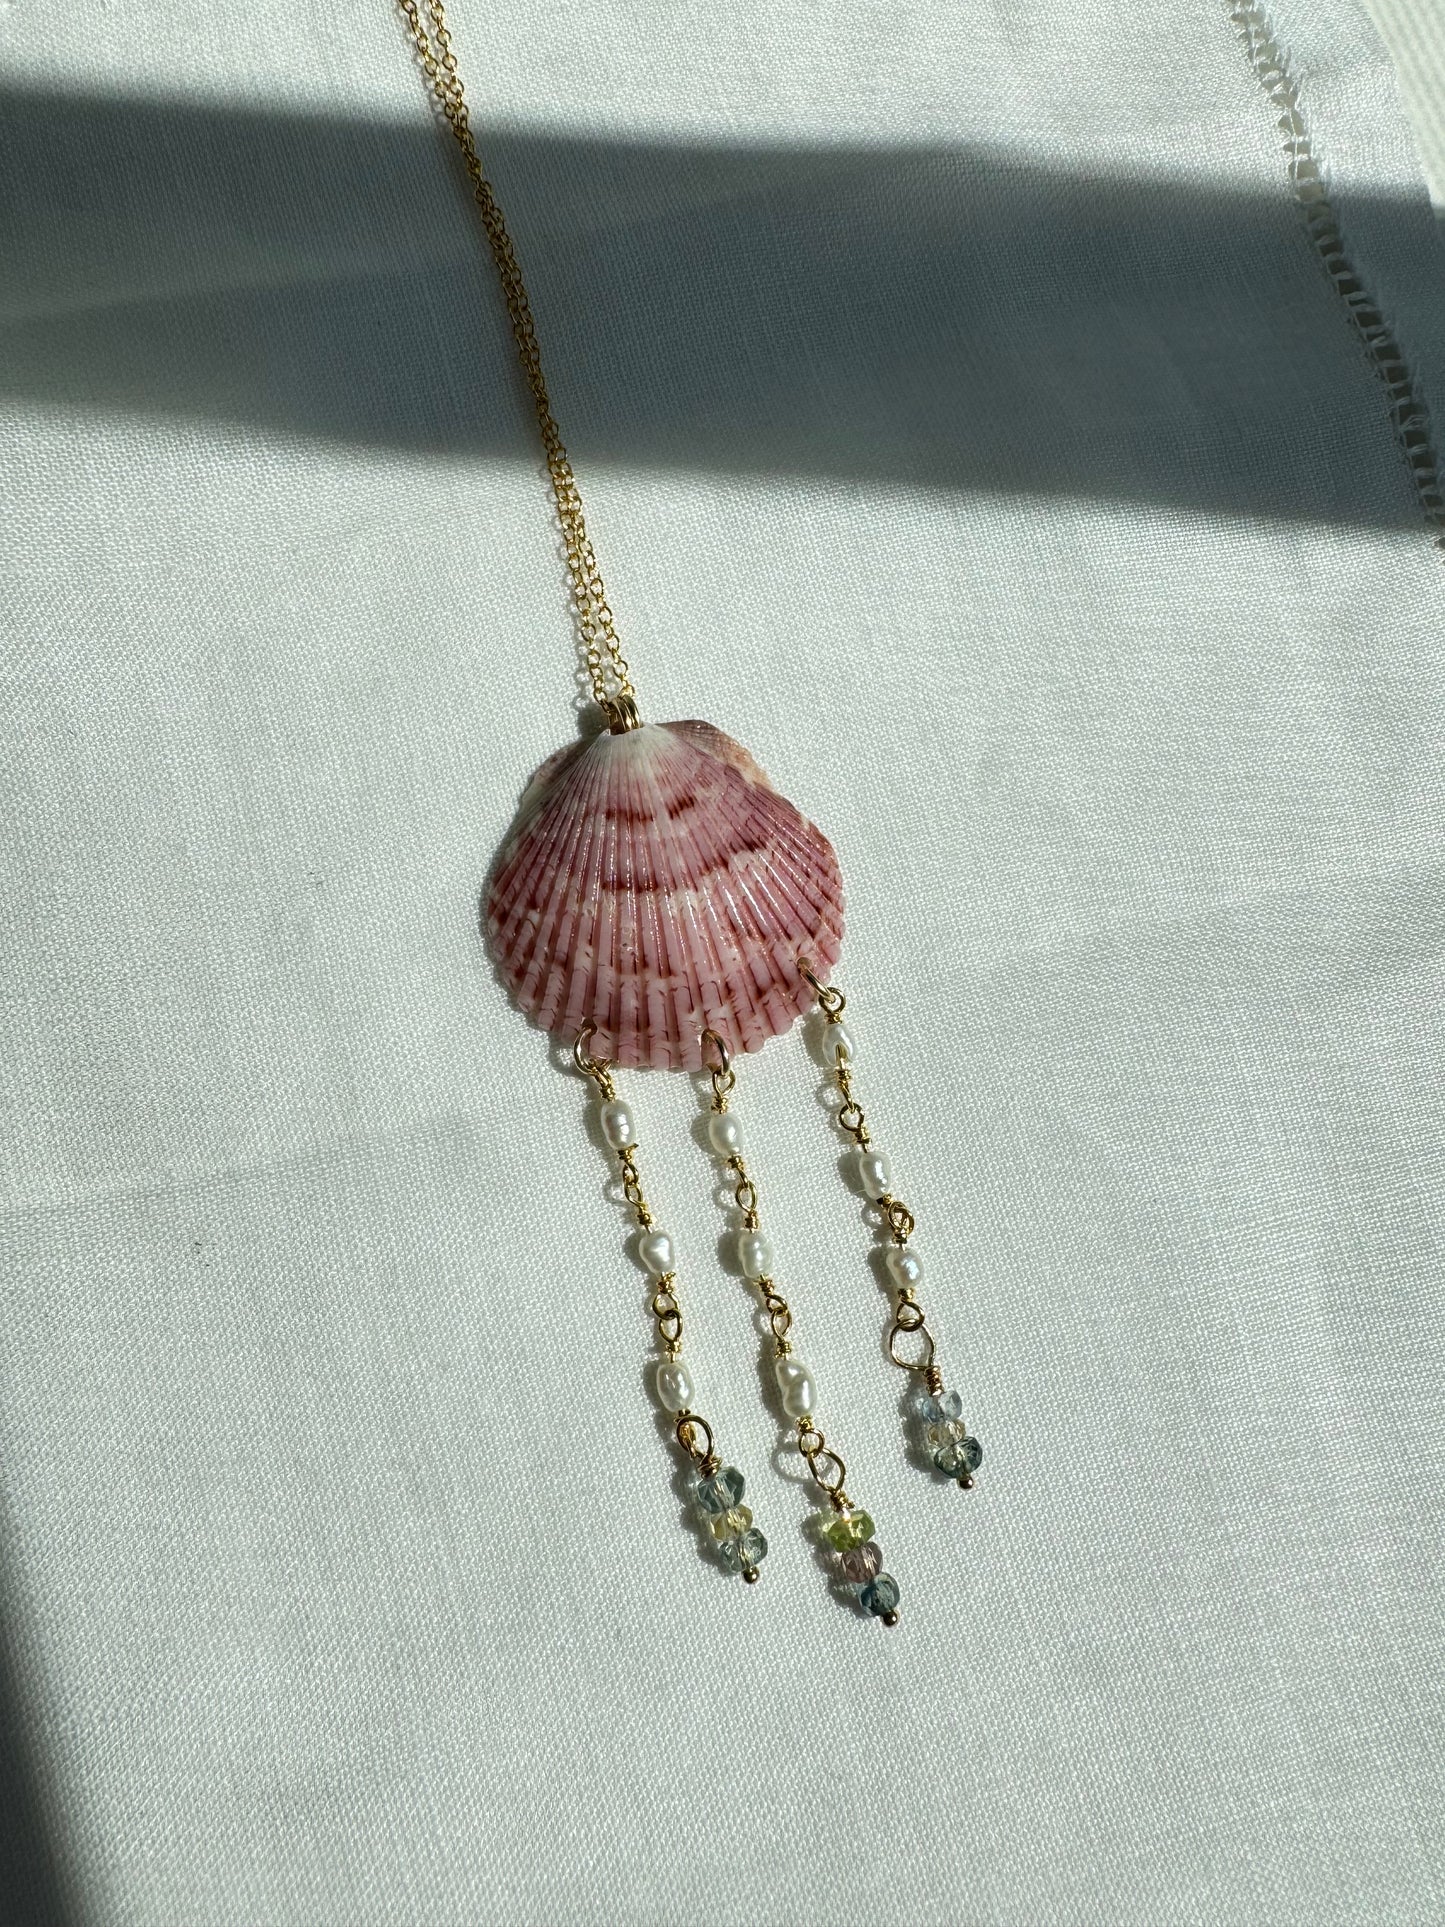 Shell Necklace #7